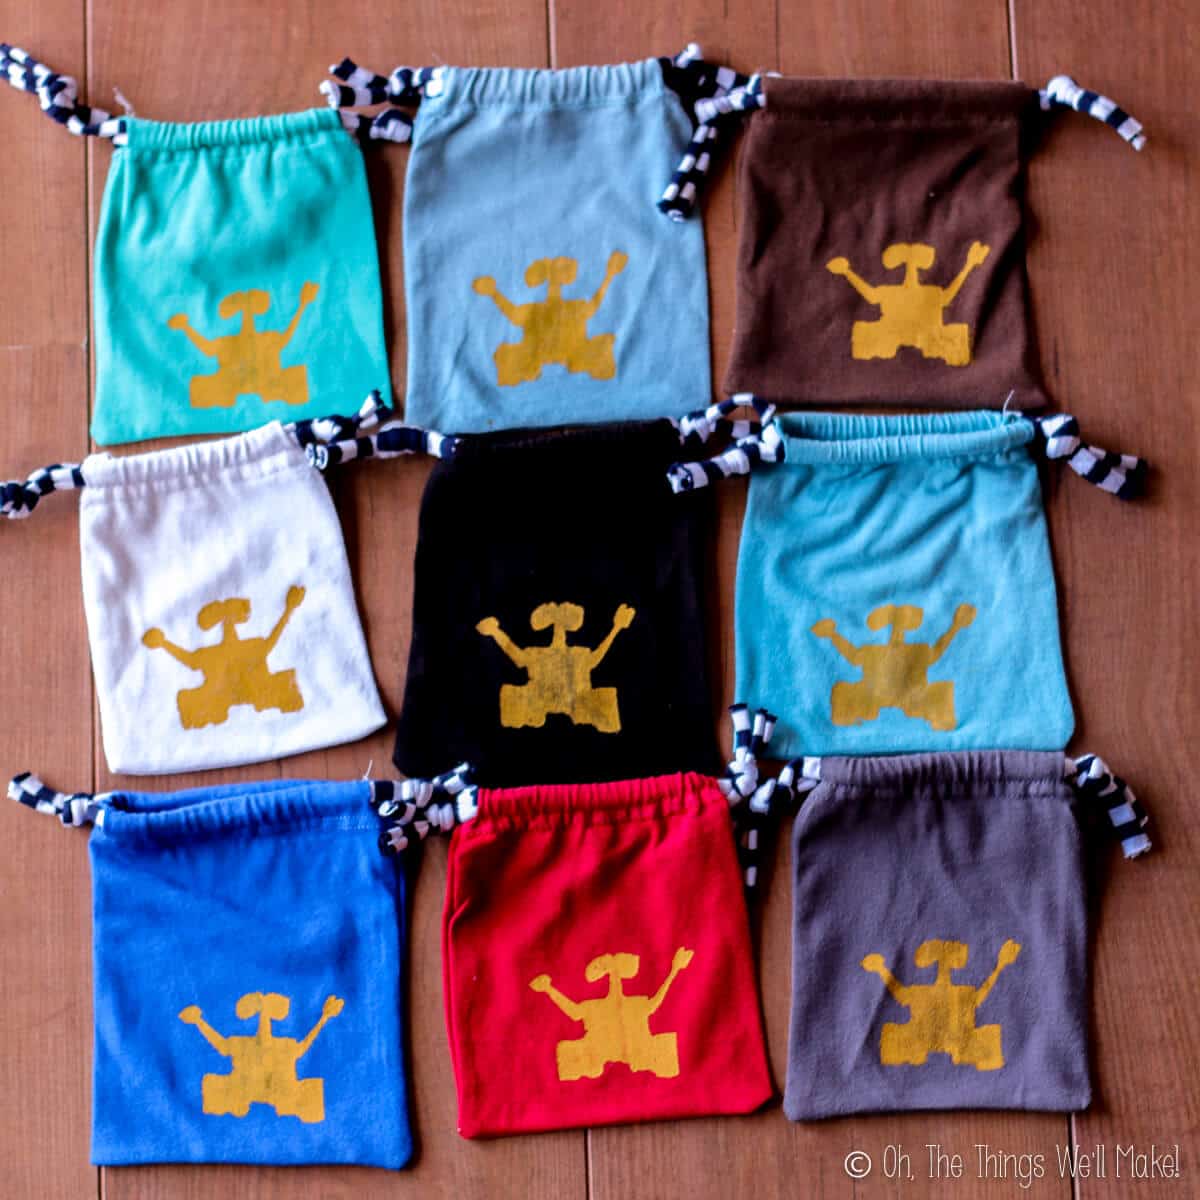 9 cloth pouches with Wall-E silk screened on them